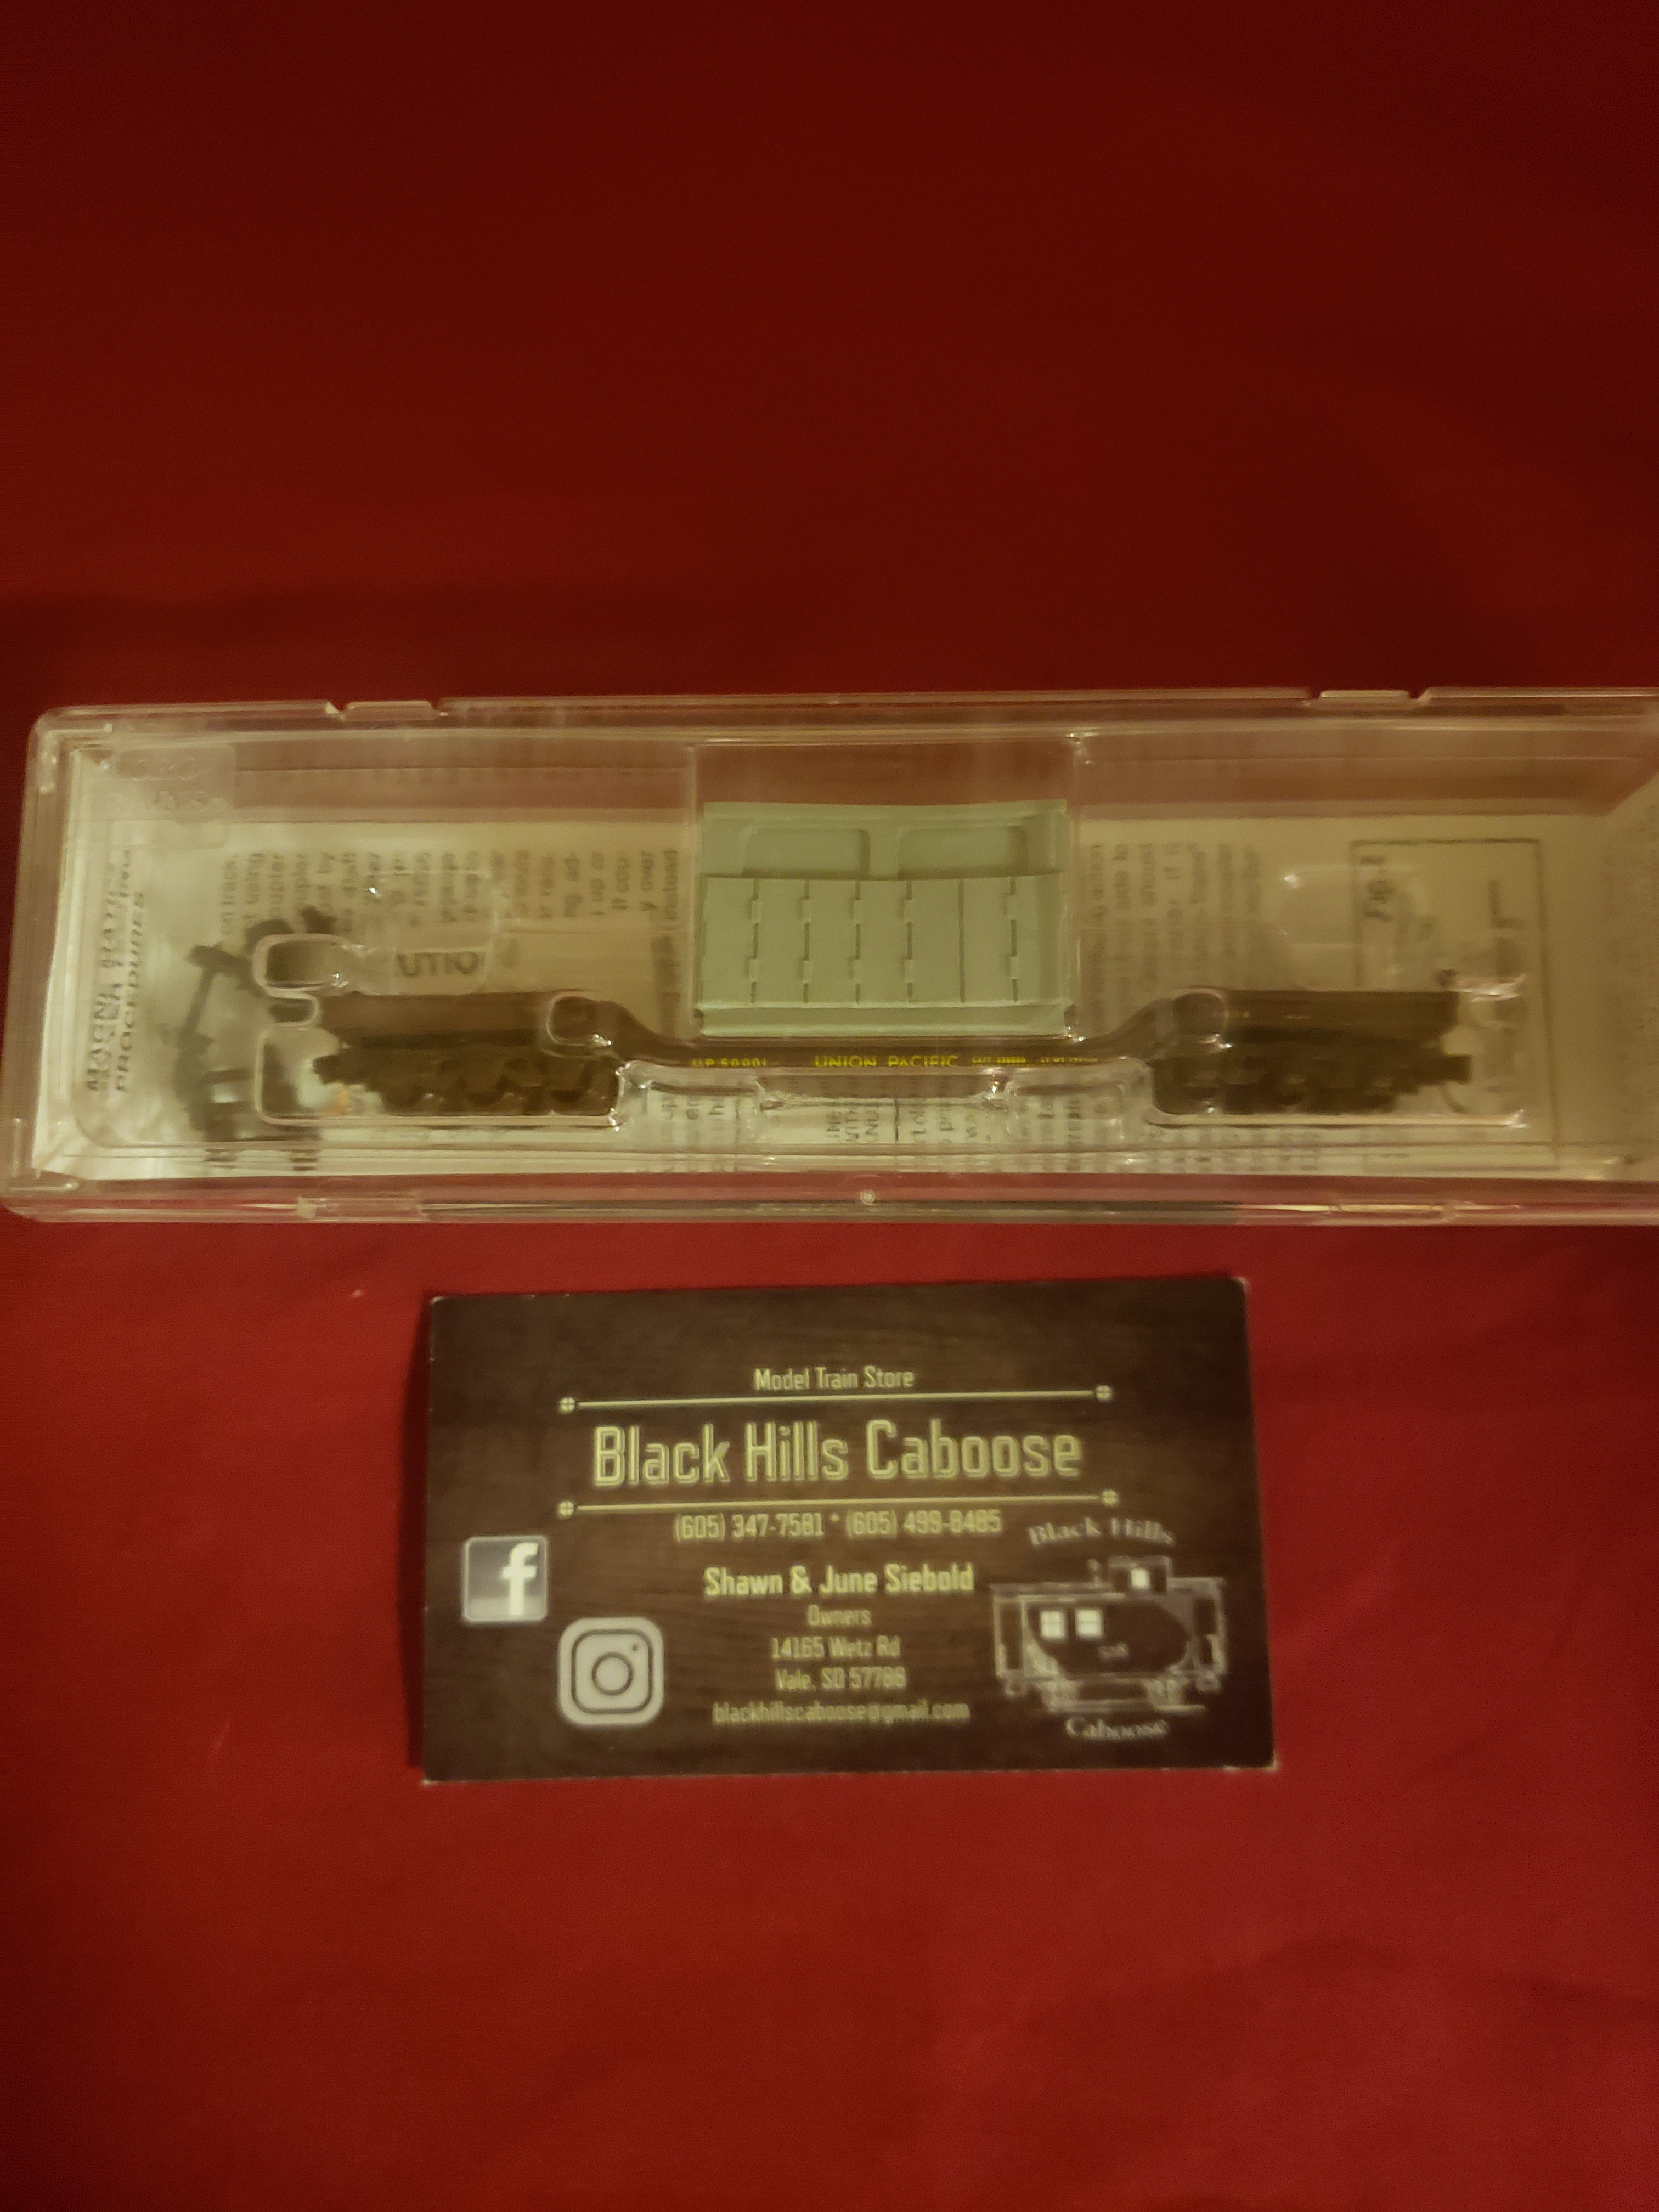 MT 109220 Union Pacific Depressed Center Flat Car with Generator Load 